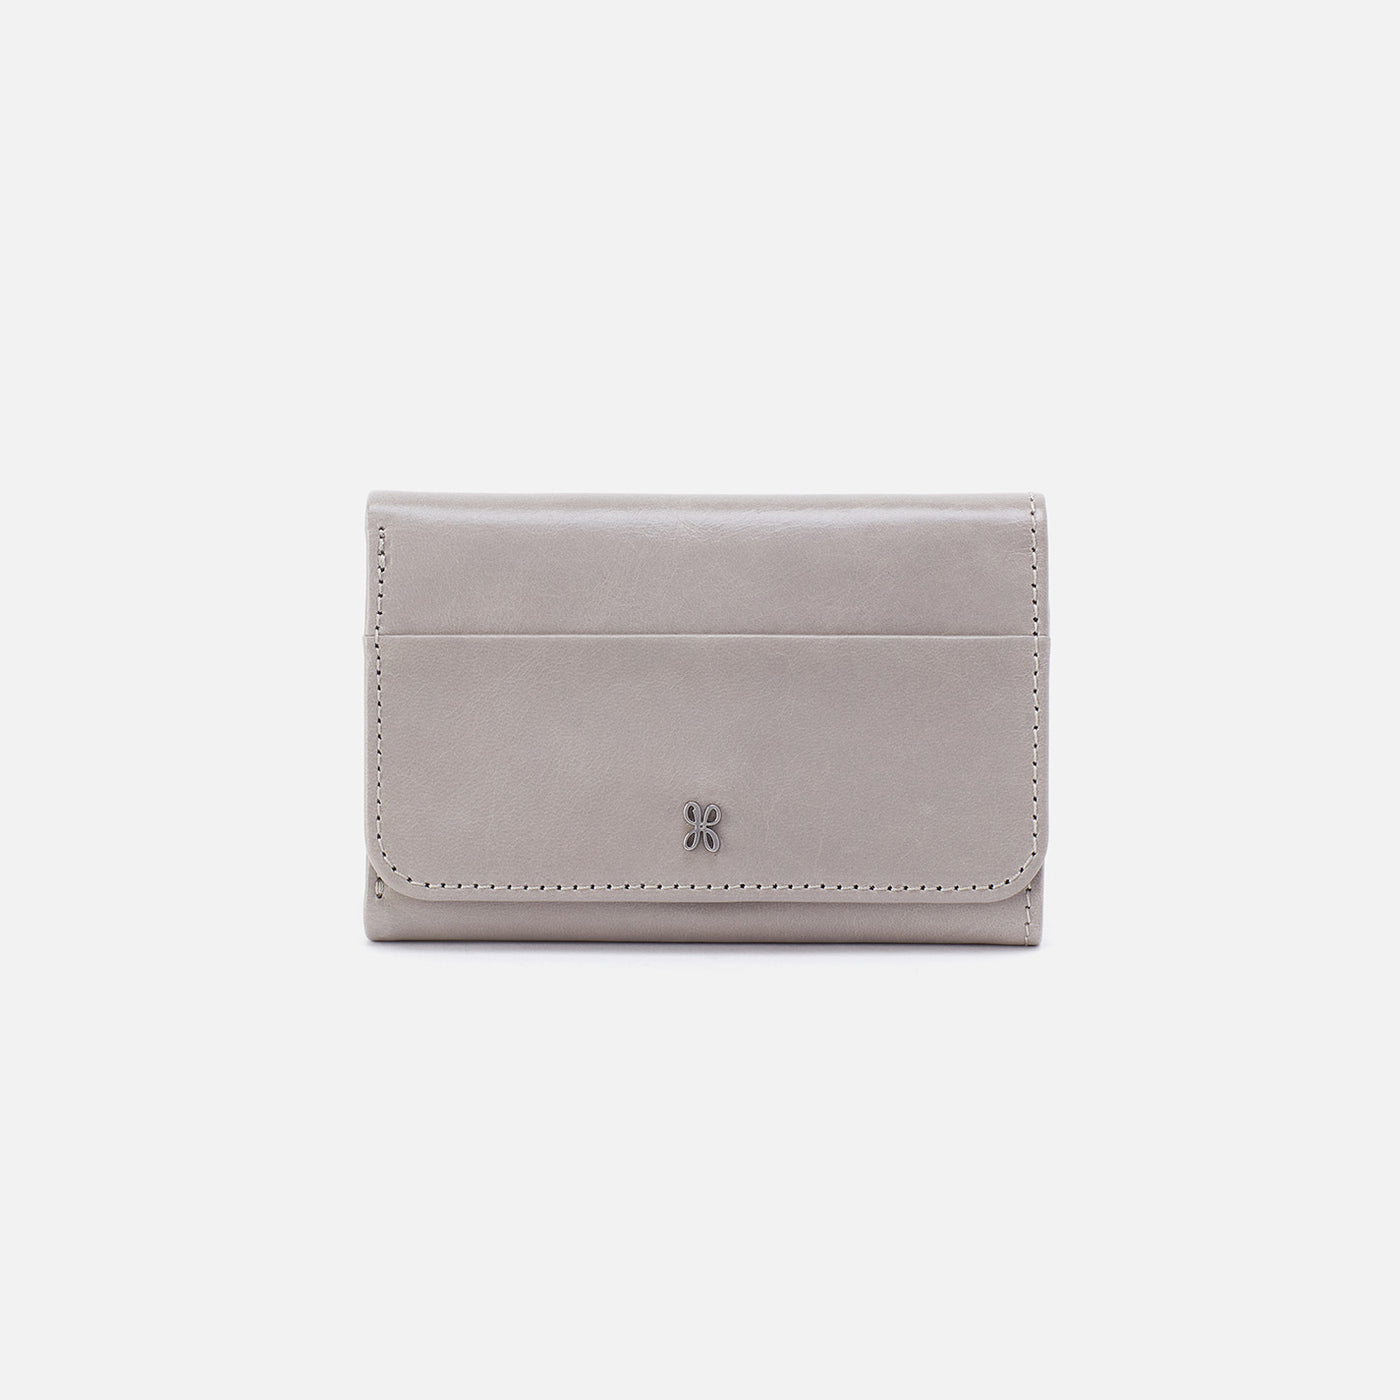 Jill Trifold Wallet in Polished Leather - Light Grey